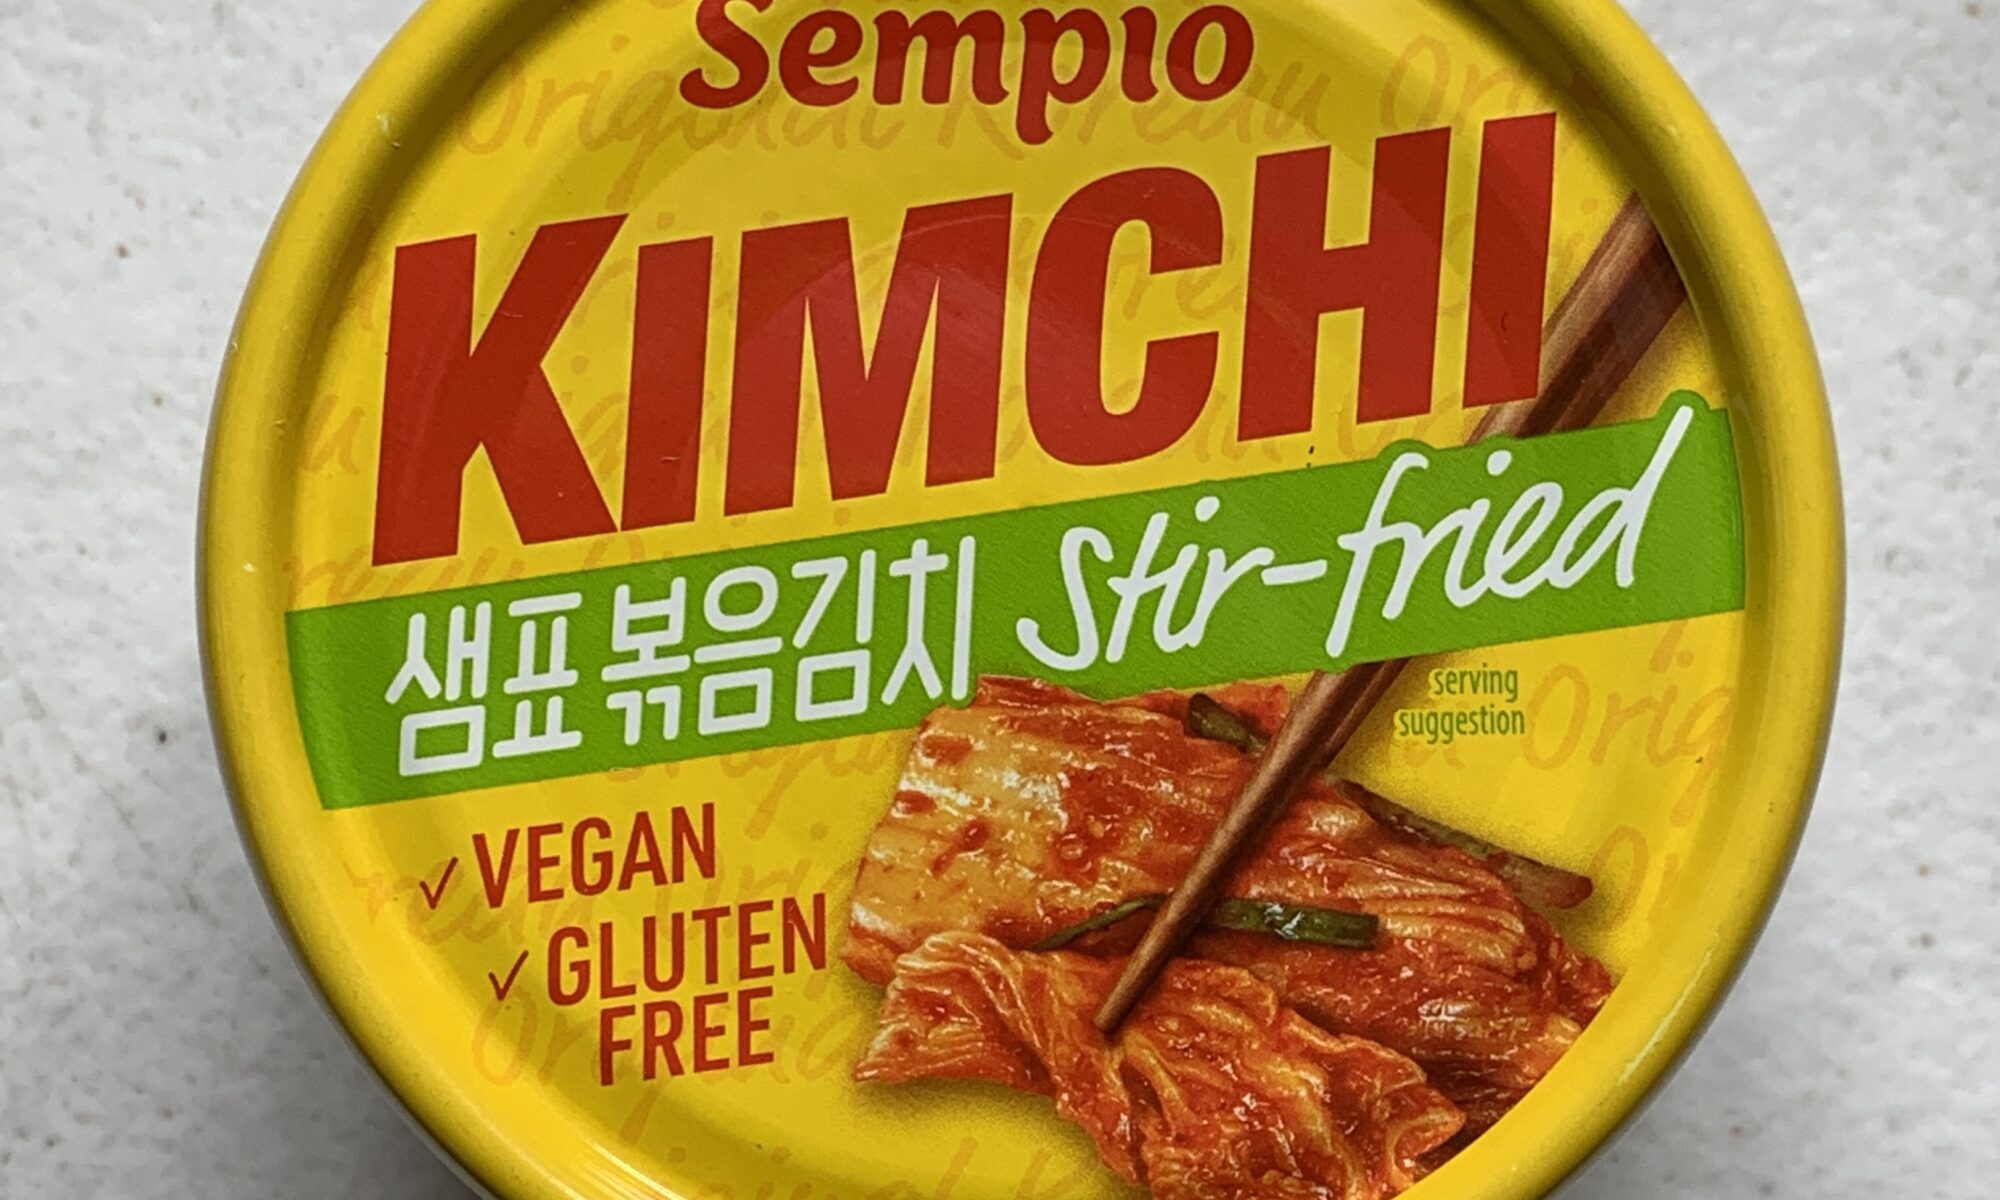 Image of the top of a can of Sempio Kimchi, Stir-Fried